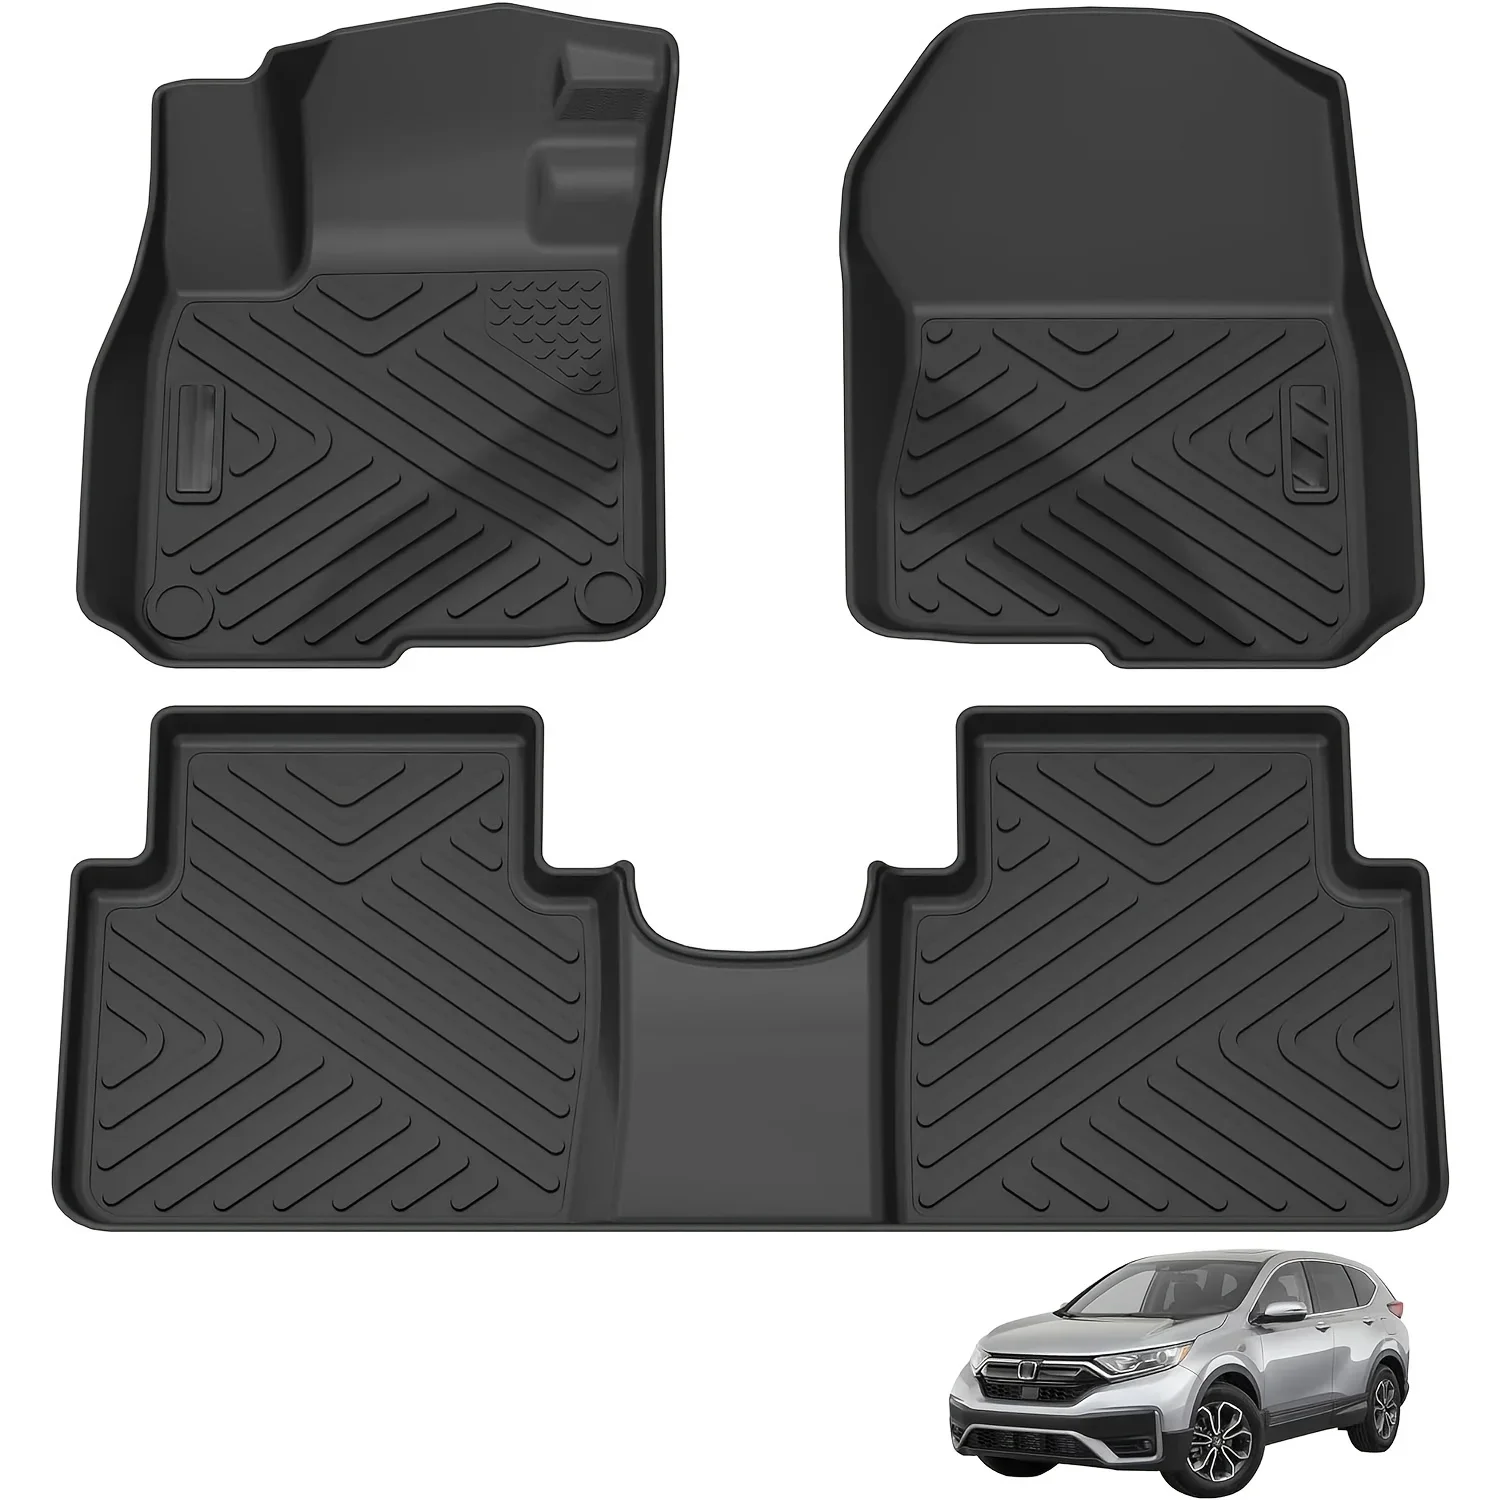 

All-Weather Black TPE Custom Fit Floor Mats Set for 2017-2022 CR-V, Premium Quality Car Floor Liners Suitable for Front & Rear R